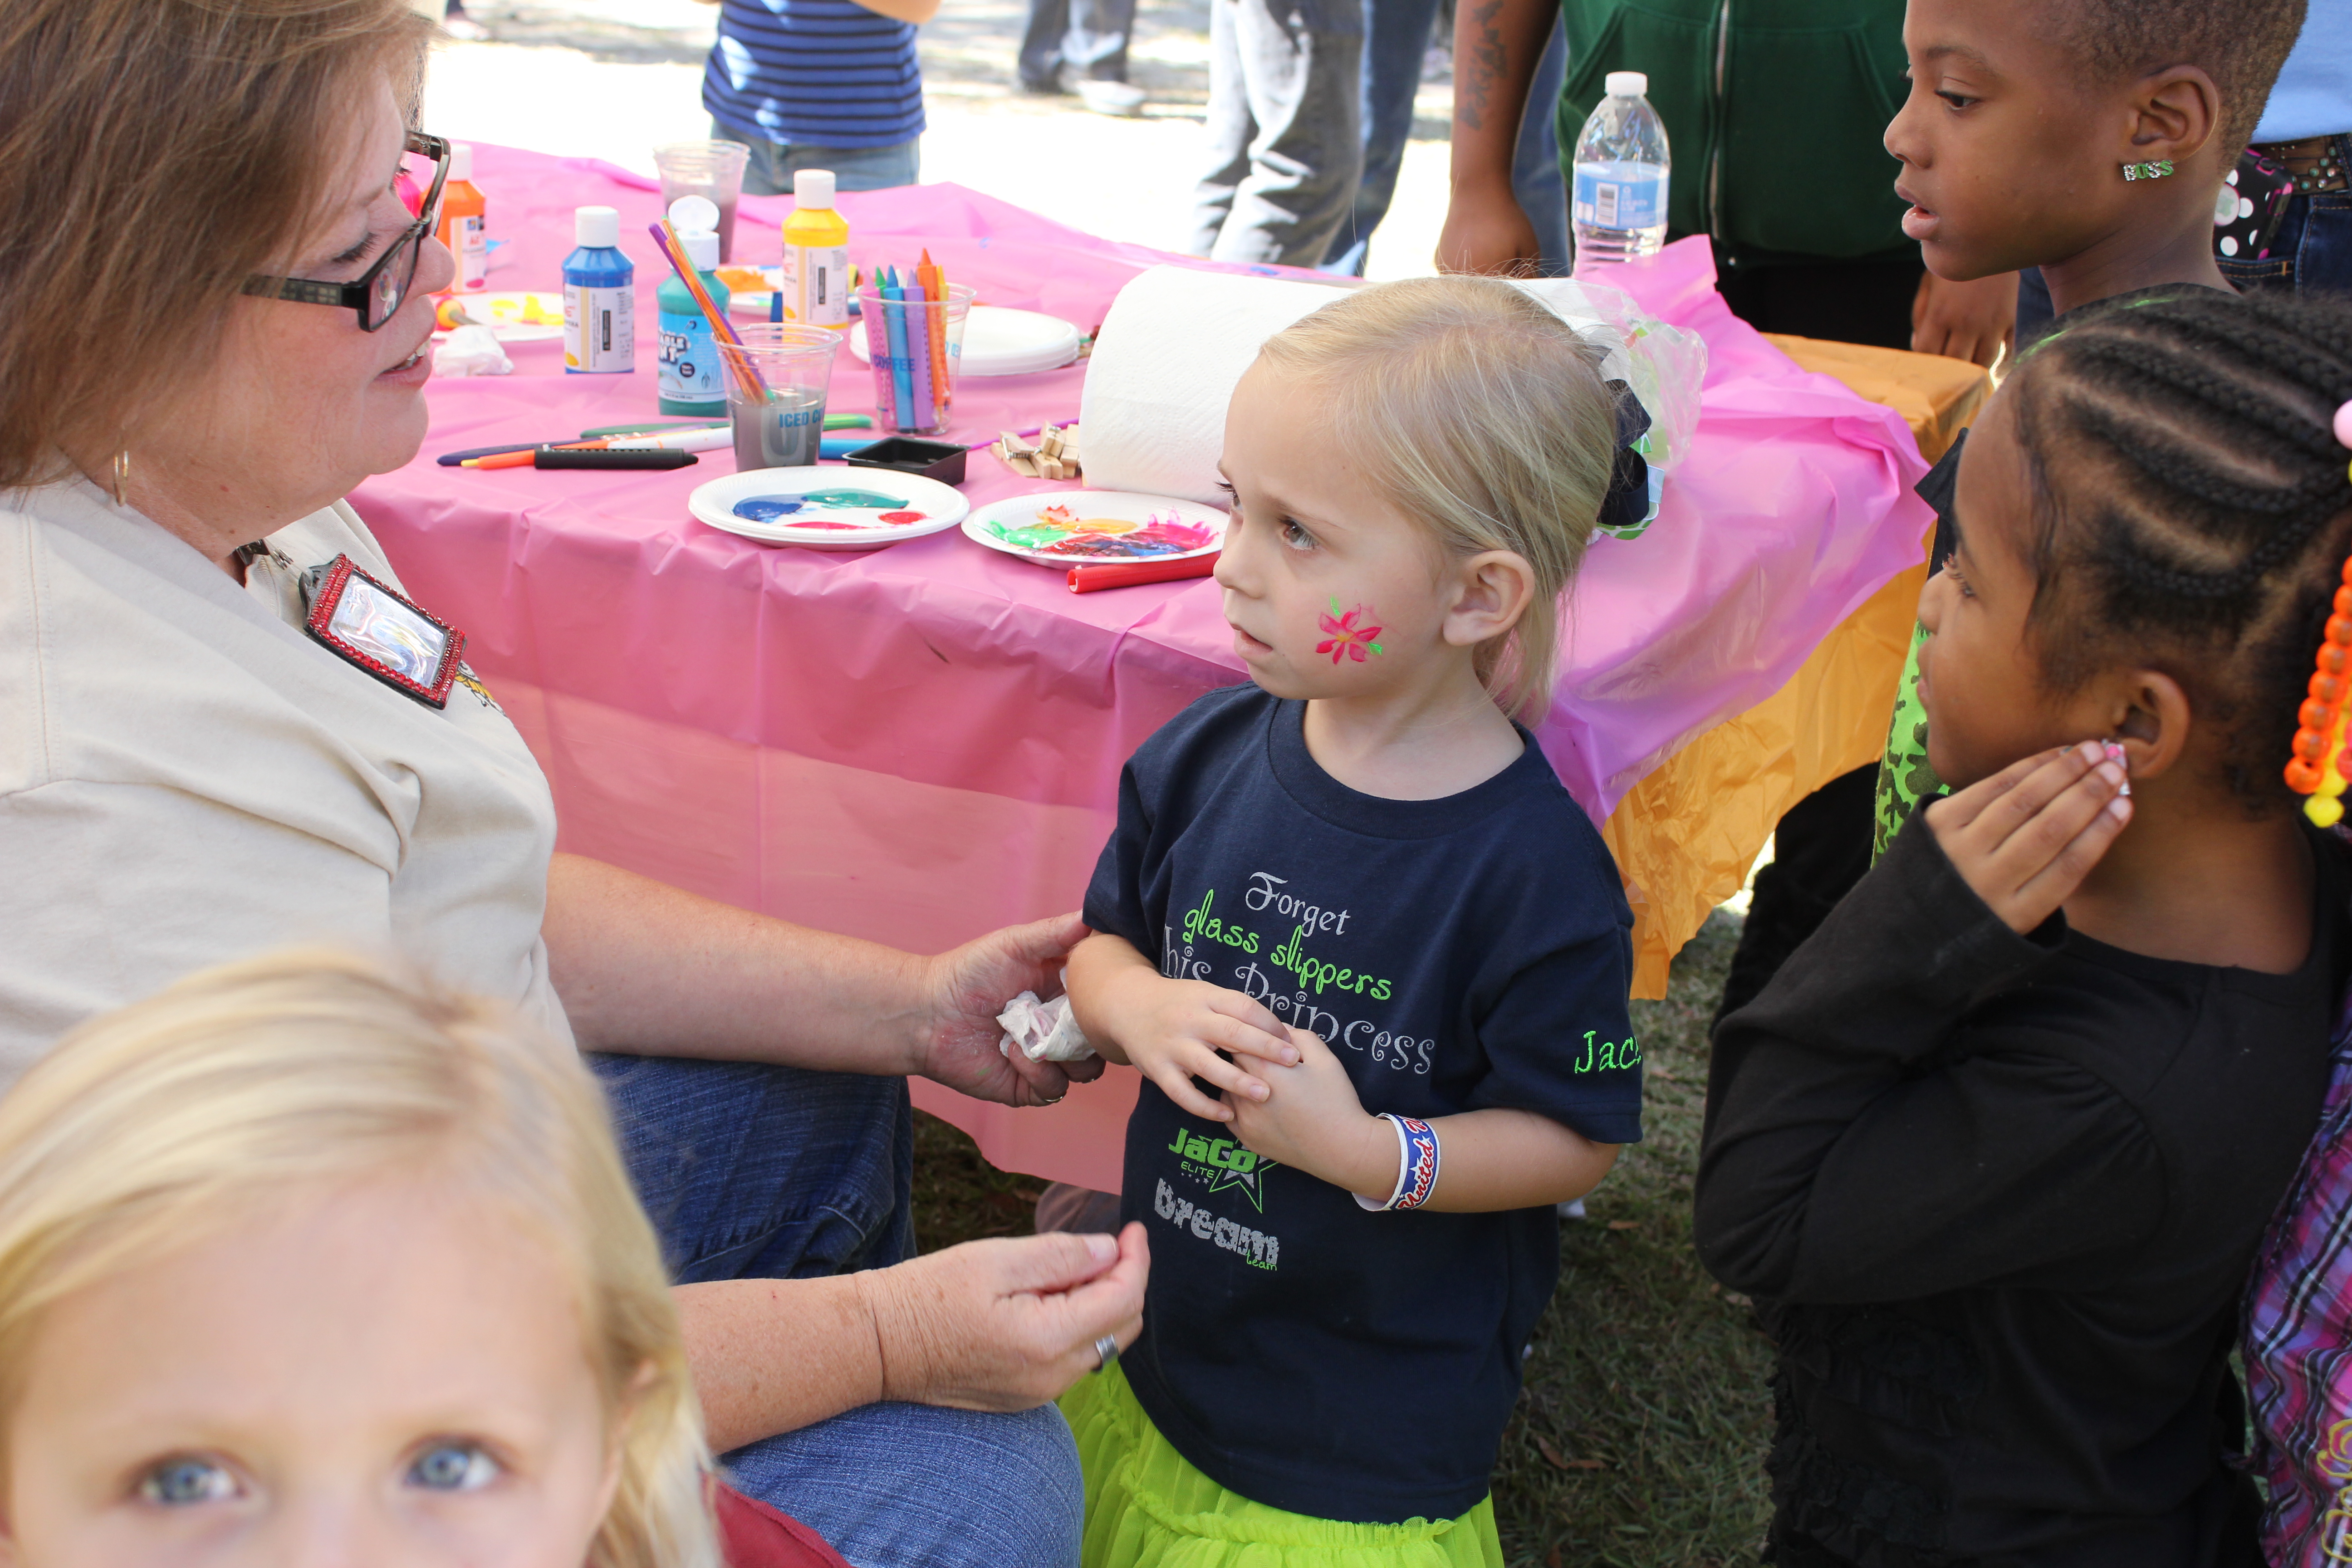 Sunland Staff Maria Johnson at the Face Painting Booth